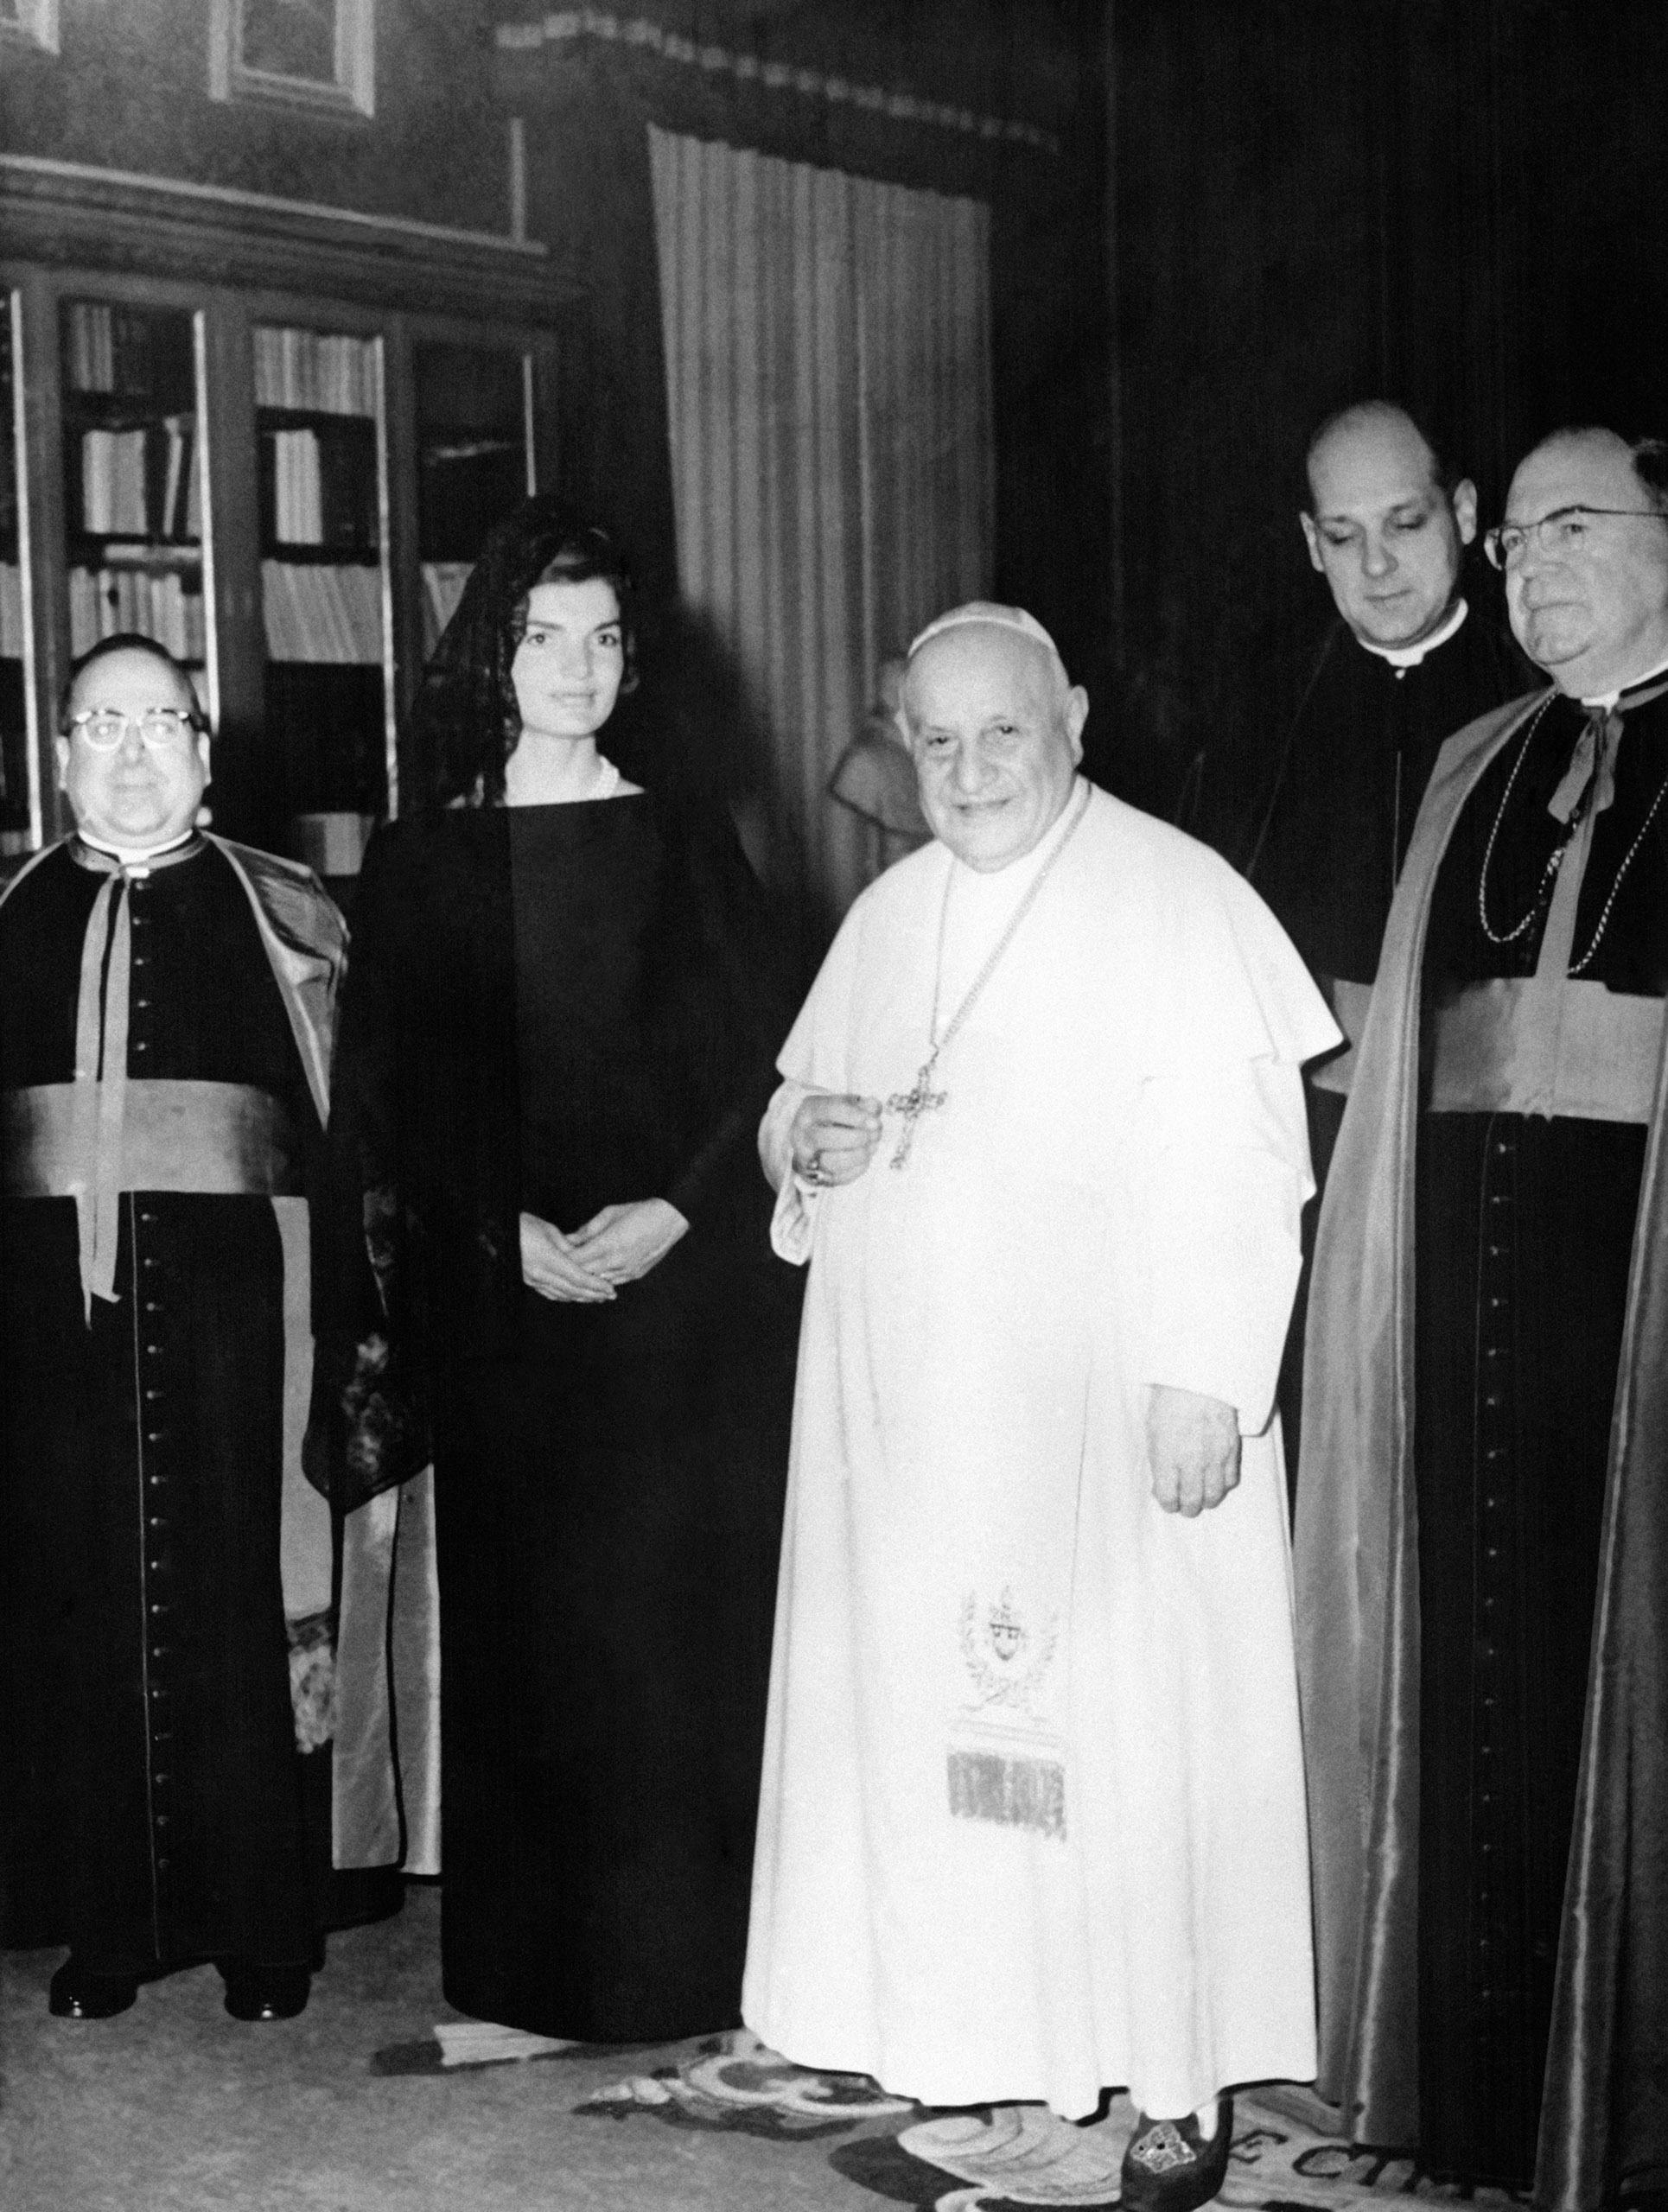 Jacqueline Kennedy stands next to Pope John XXIII during an audience in the Pontiff's private library in the Vatican, Italy, March 11, 1962.